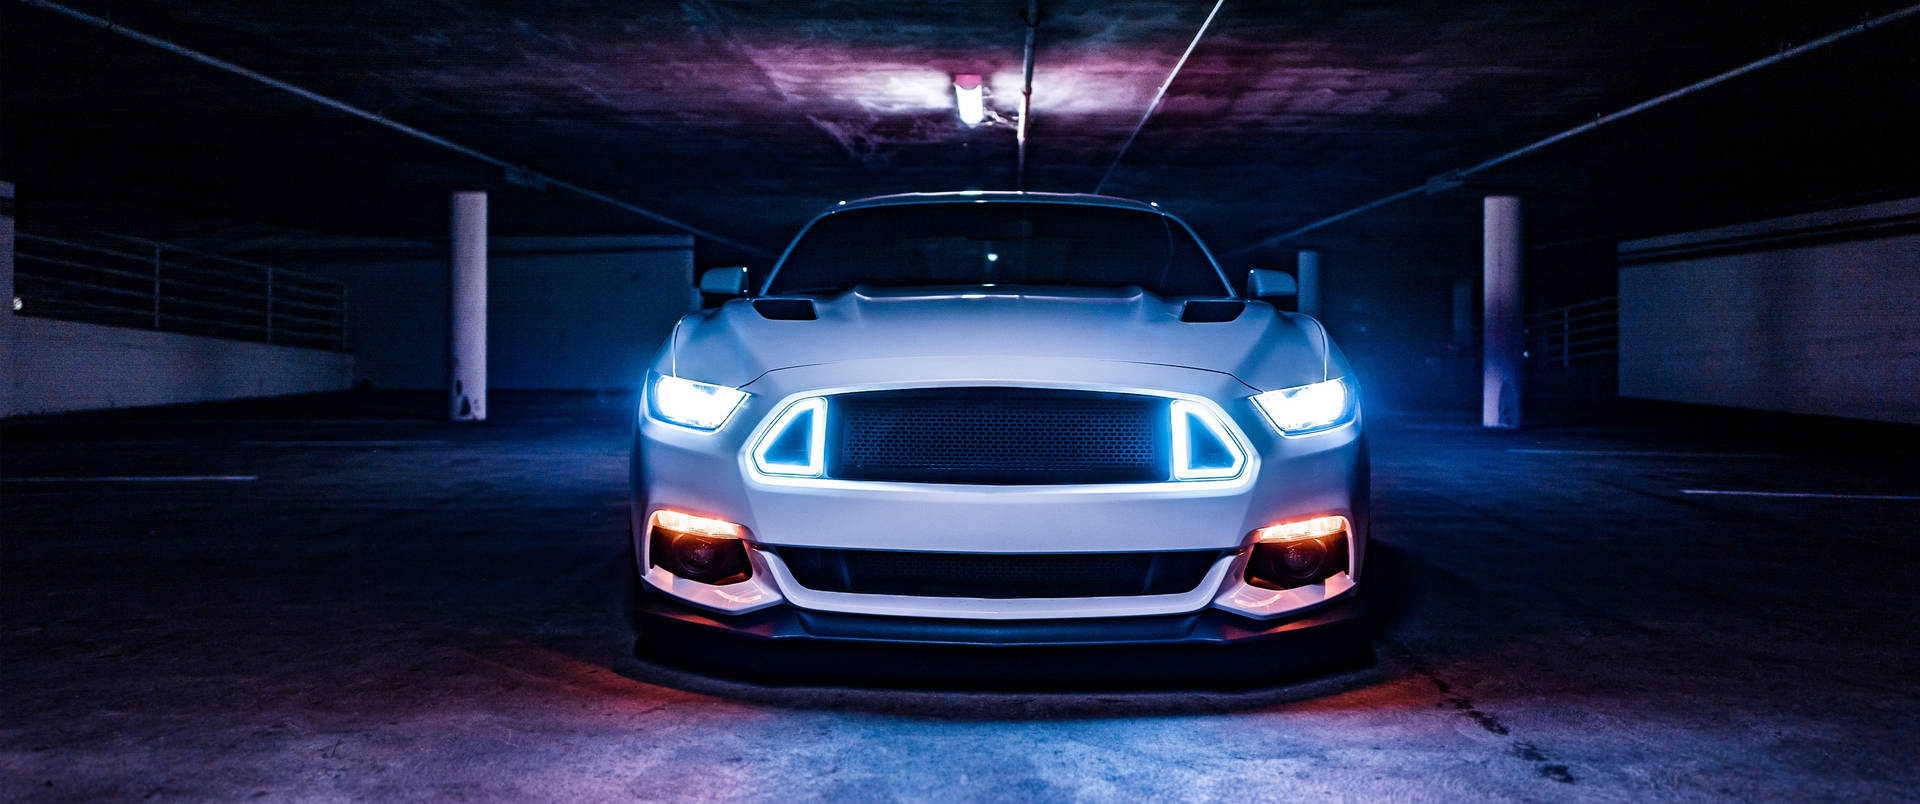 3440x1440auto Ford Mustang Wallpaper